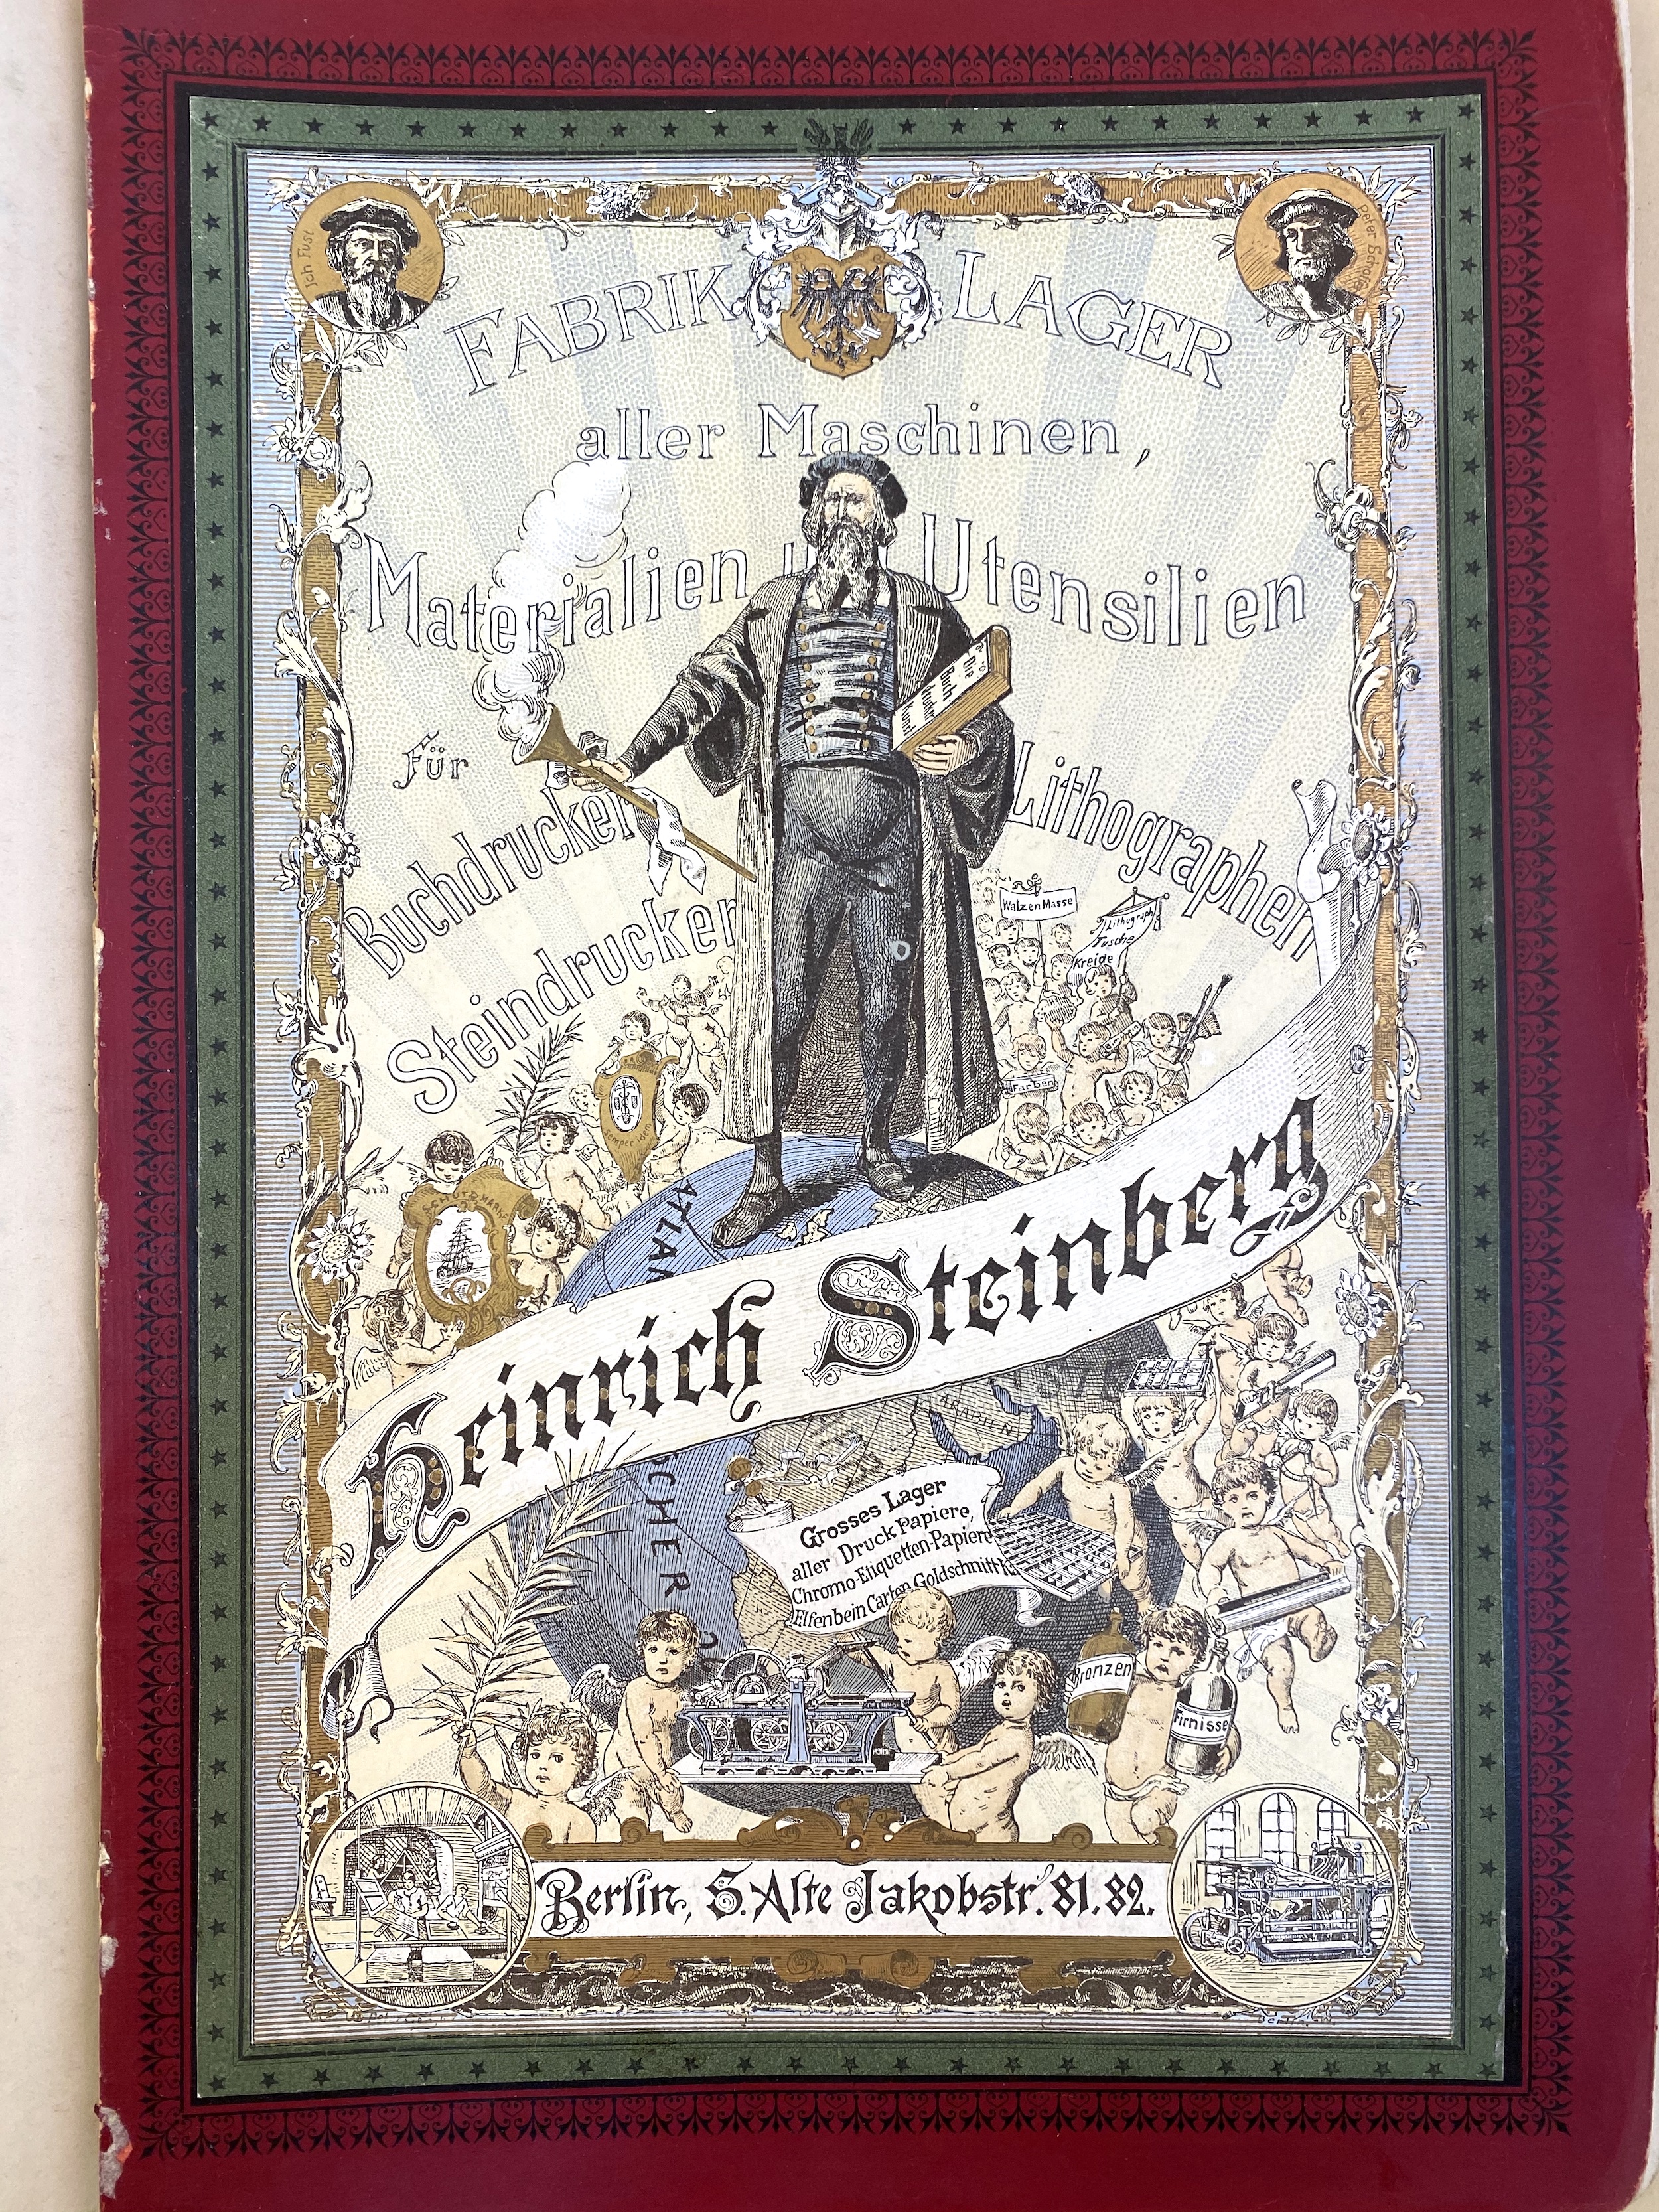 The detail on this second cover on Steinberg's catalogue is immense